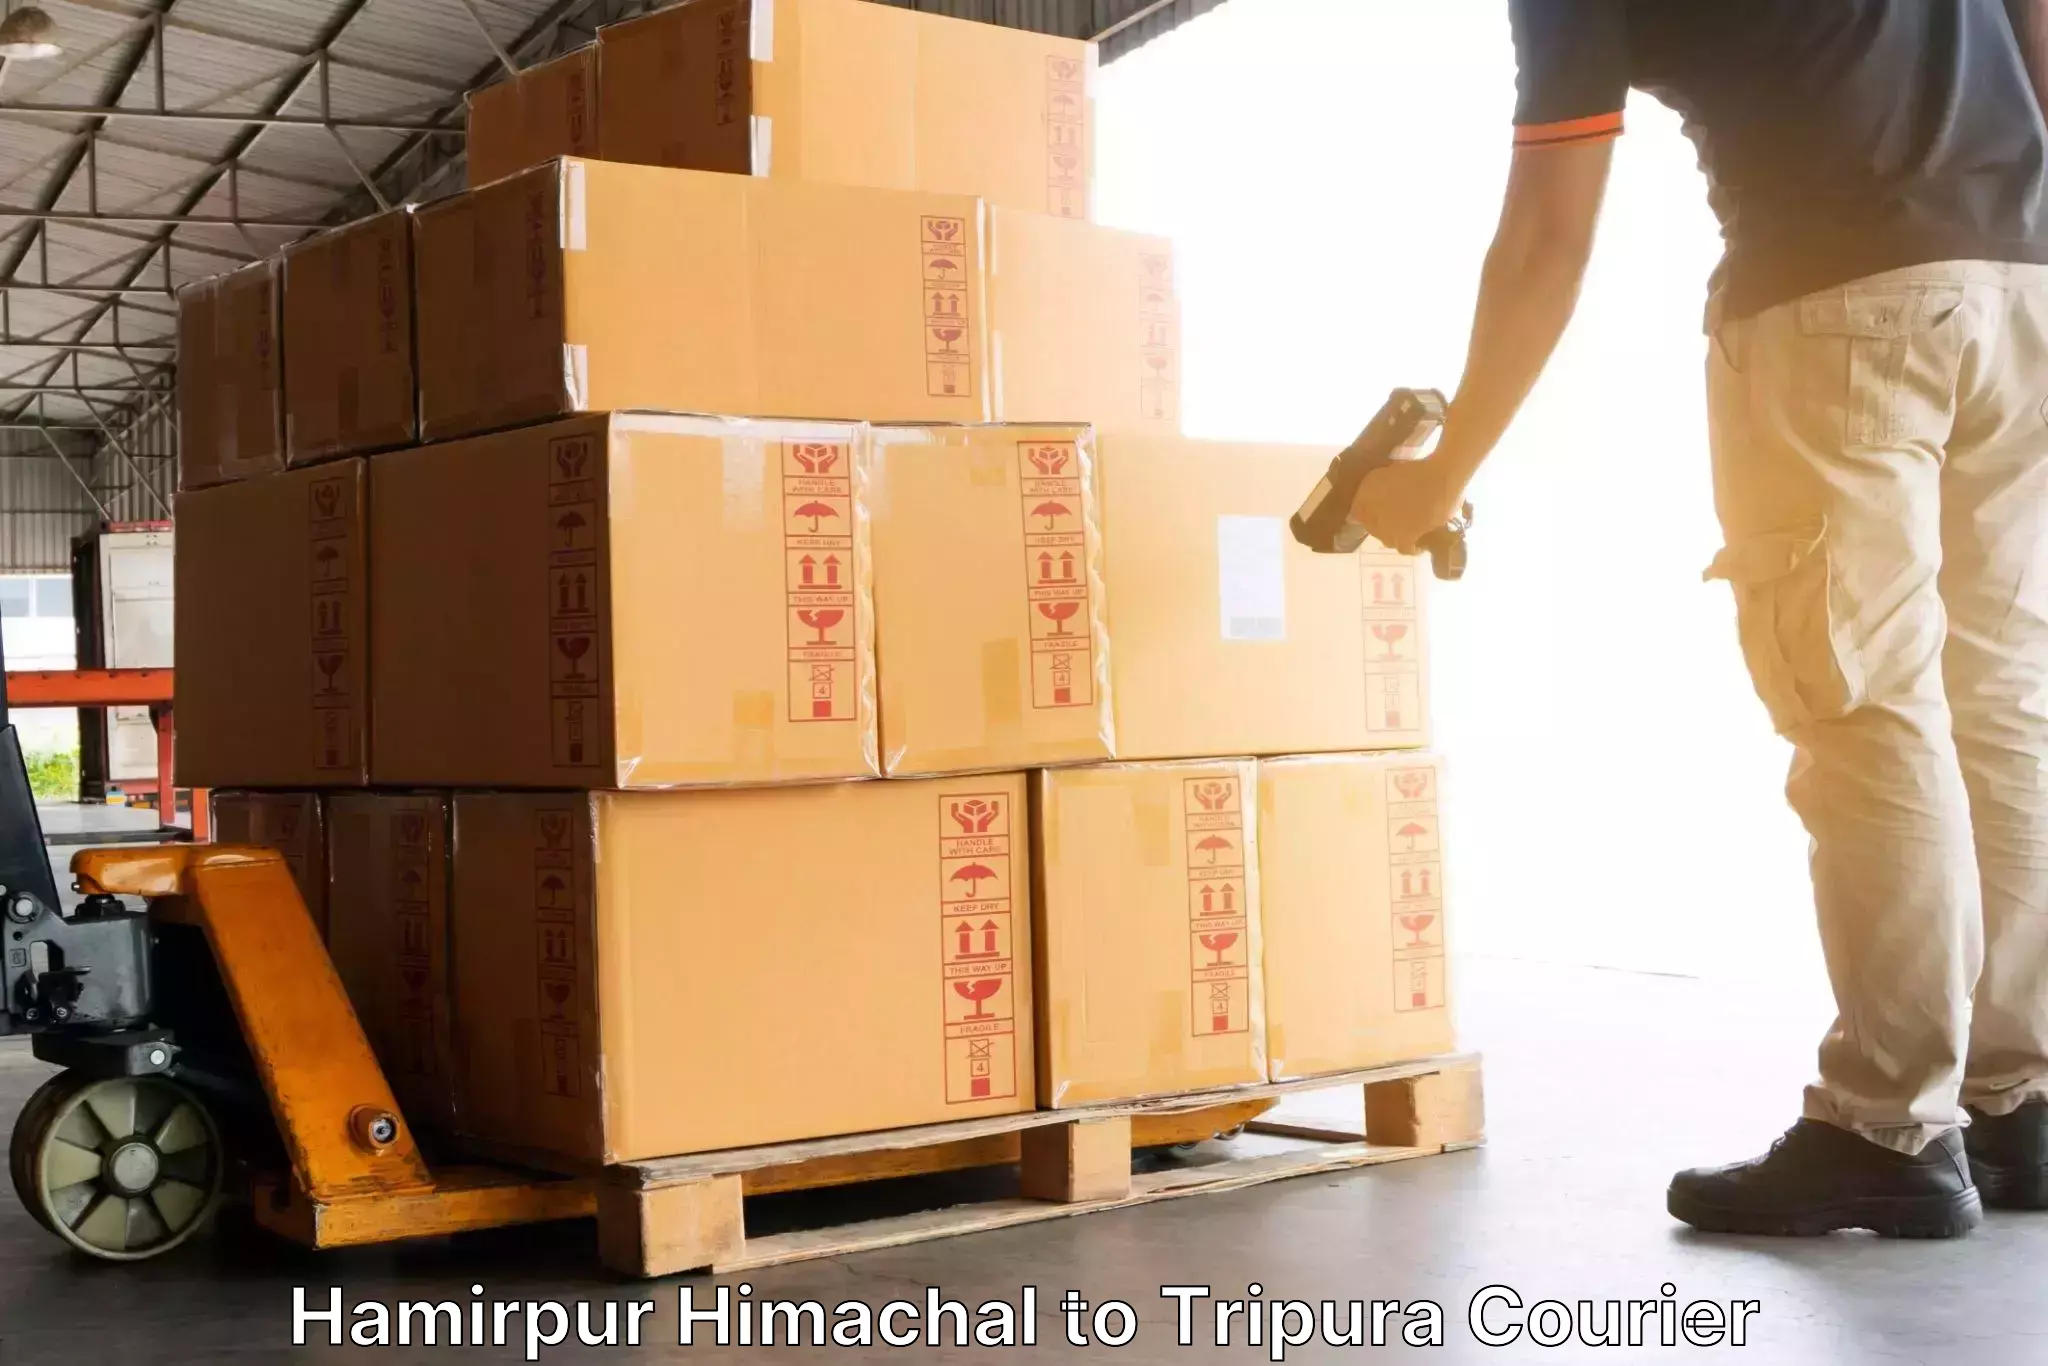 Efficient shipping operations Hamirpur Himachal to Tripura